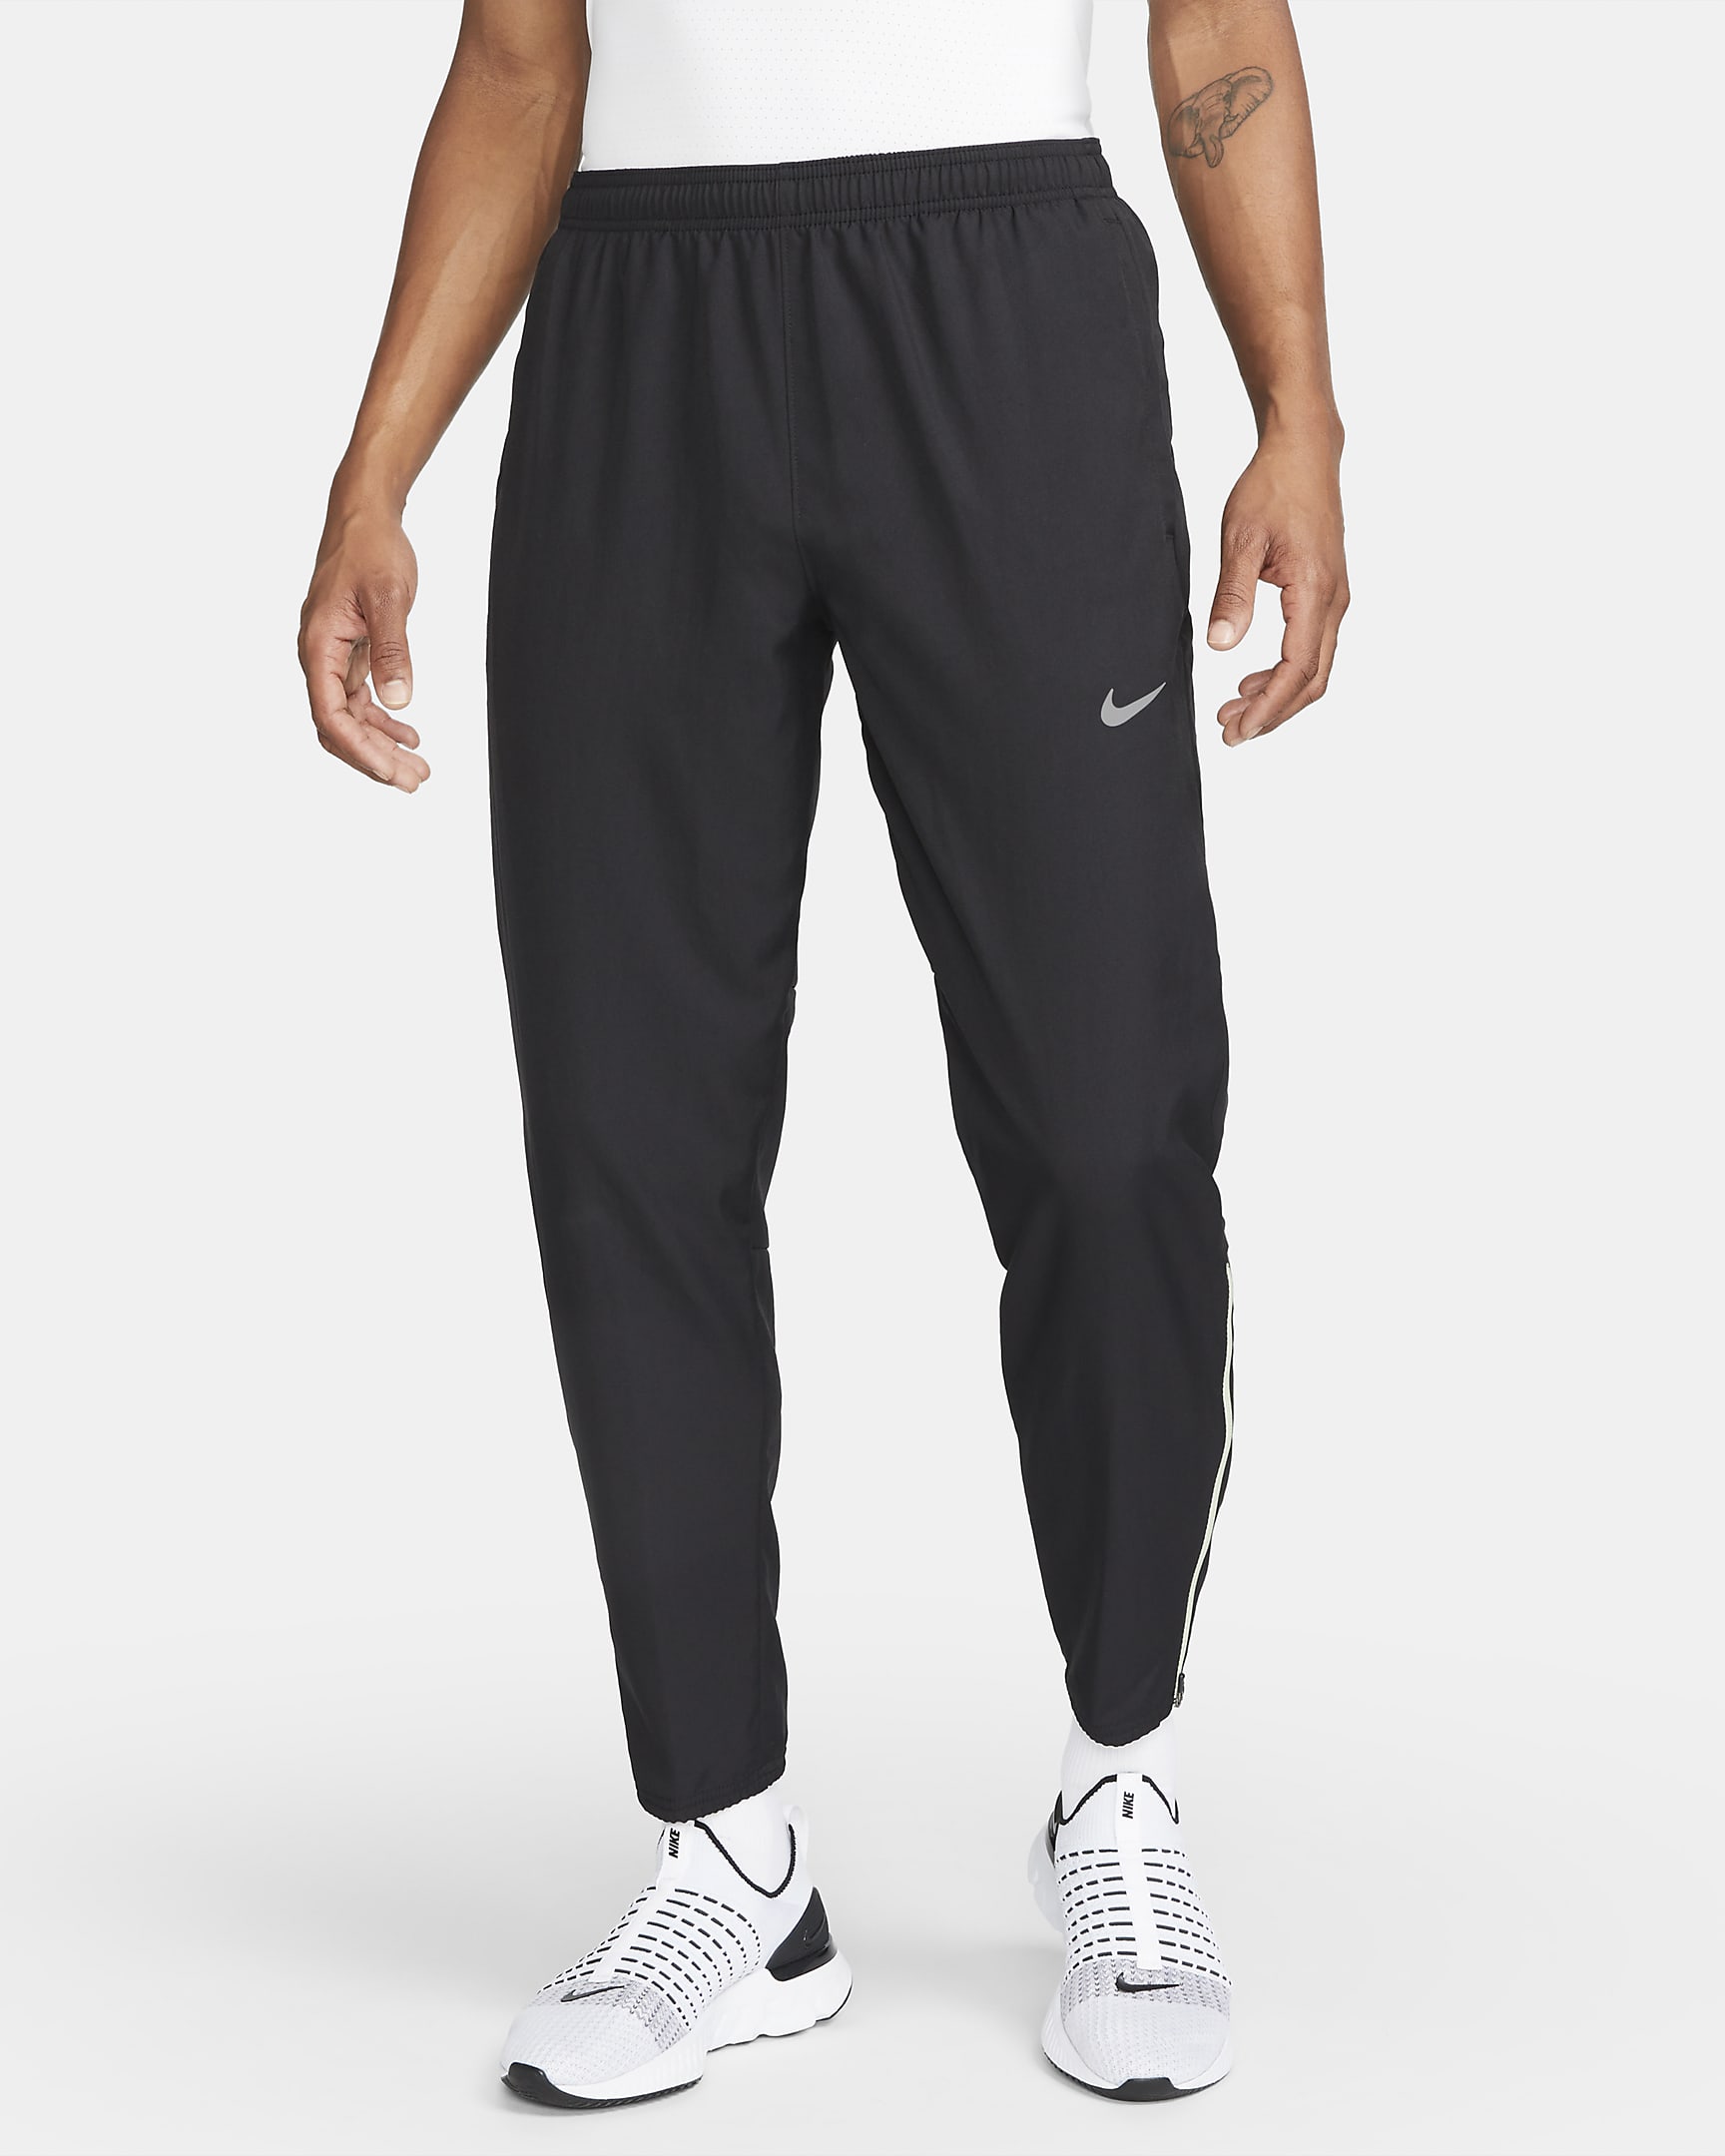 Nike Dri-FIT Challenger Men's Woven Running Trousers. Nike NO